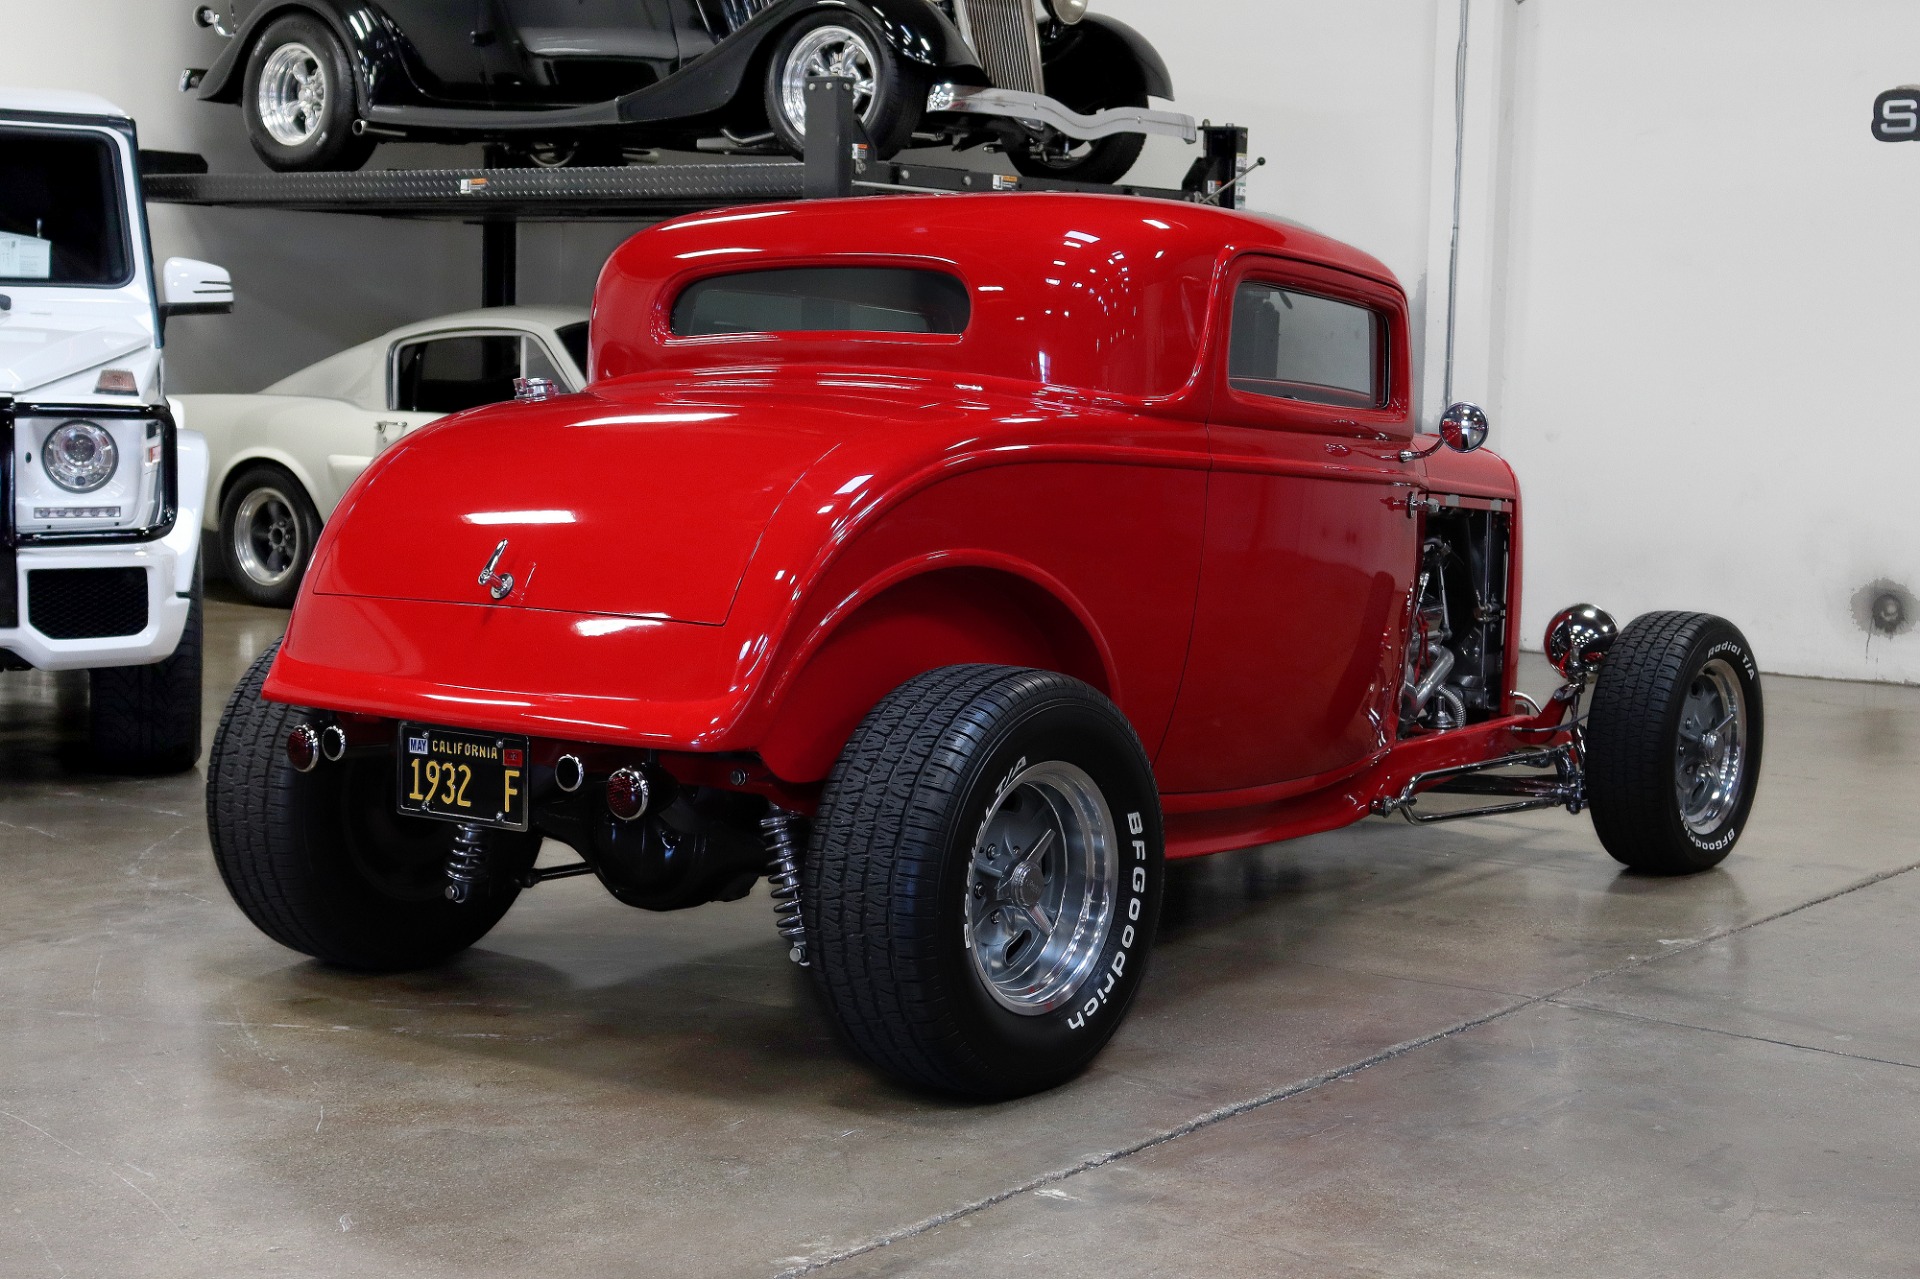 Used 1932 Ford Coupe For Sale ($49,995) | San Francisco Sports Cars ...